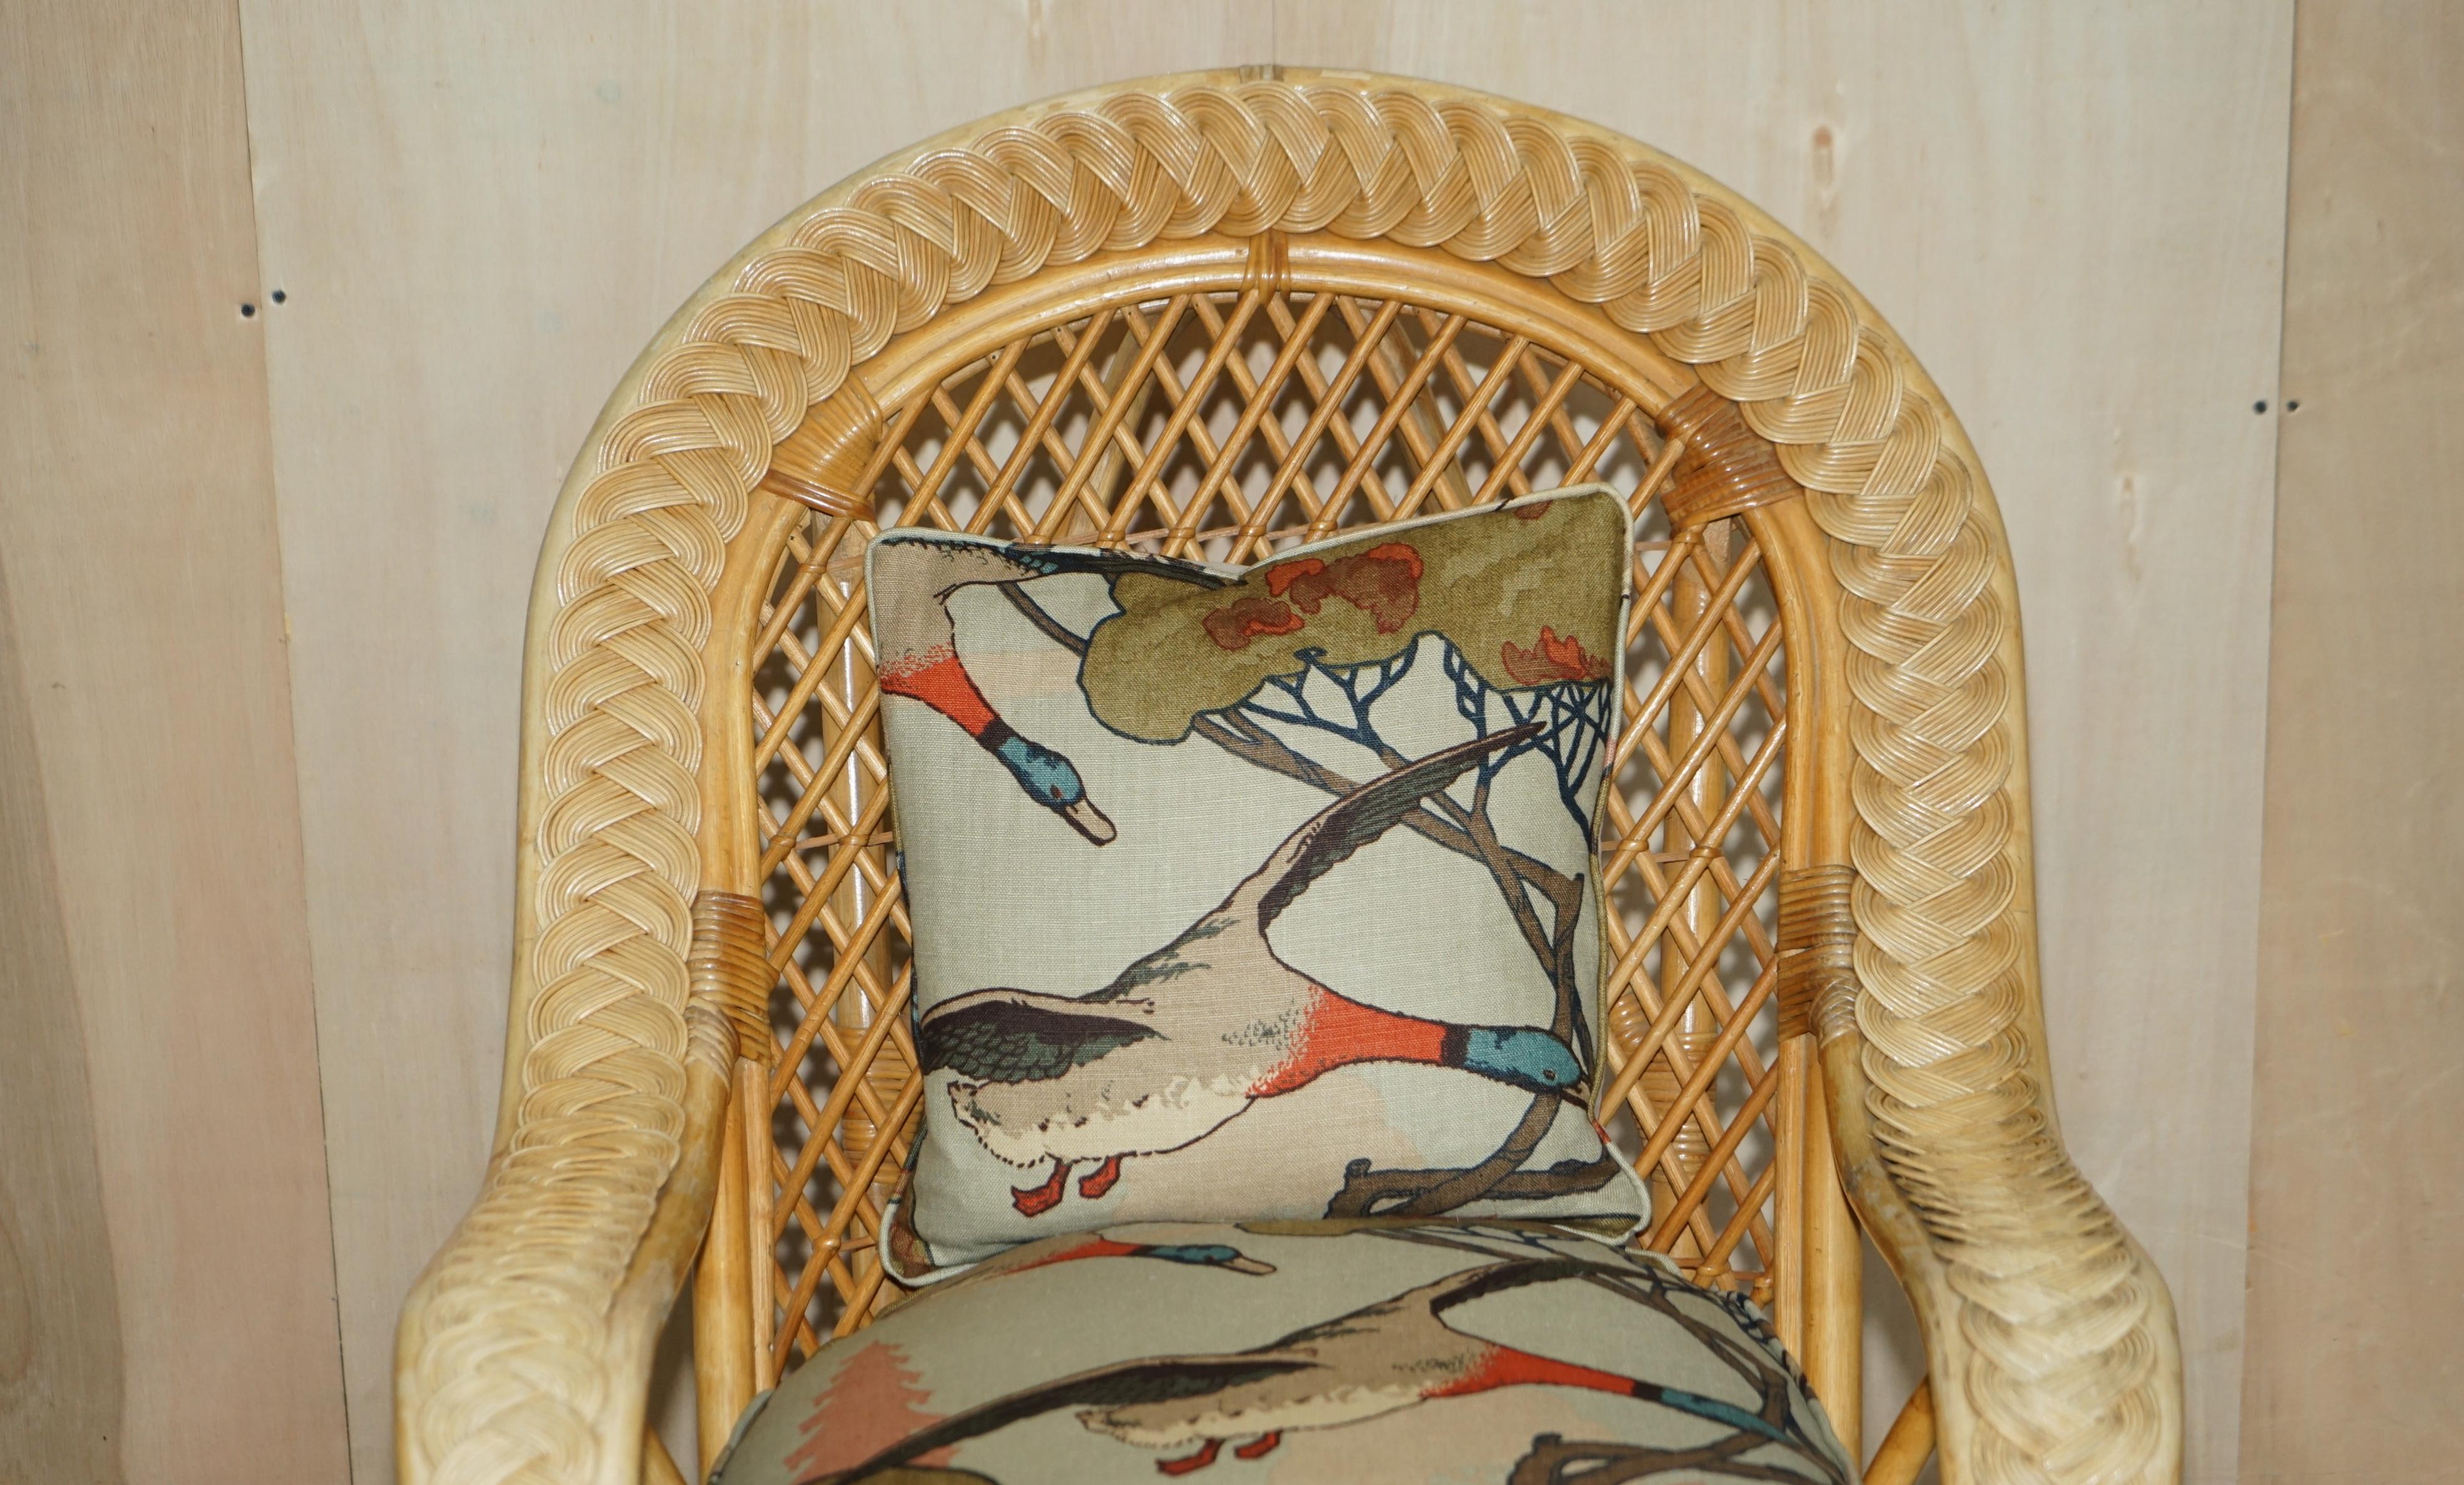 WICKER ARMCHAIRS STOOL TABLE SUITE UPHOLSTERED WiTH MULBERRY FLYING DUCKS FABRIC For Sale 5